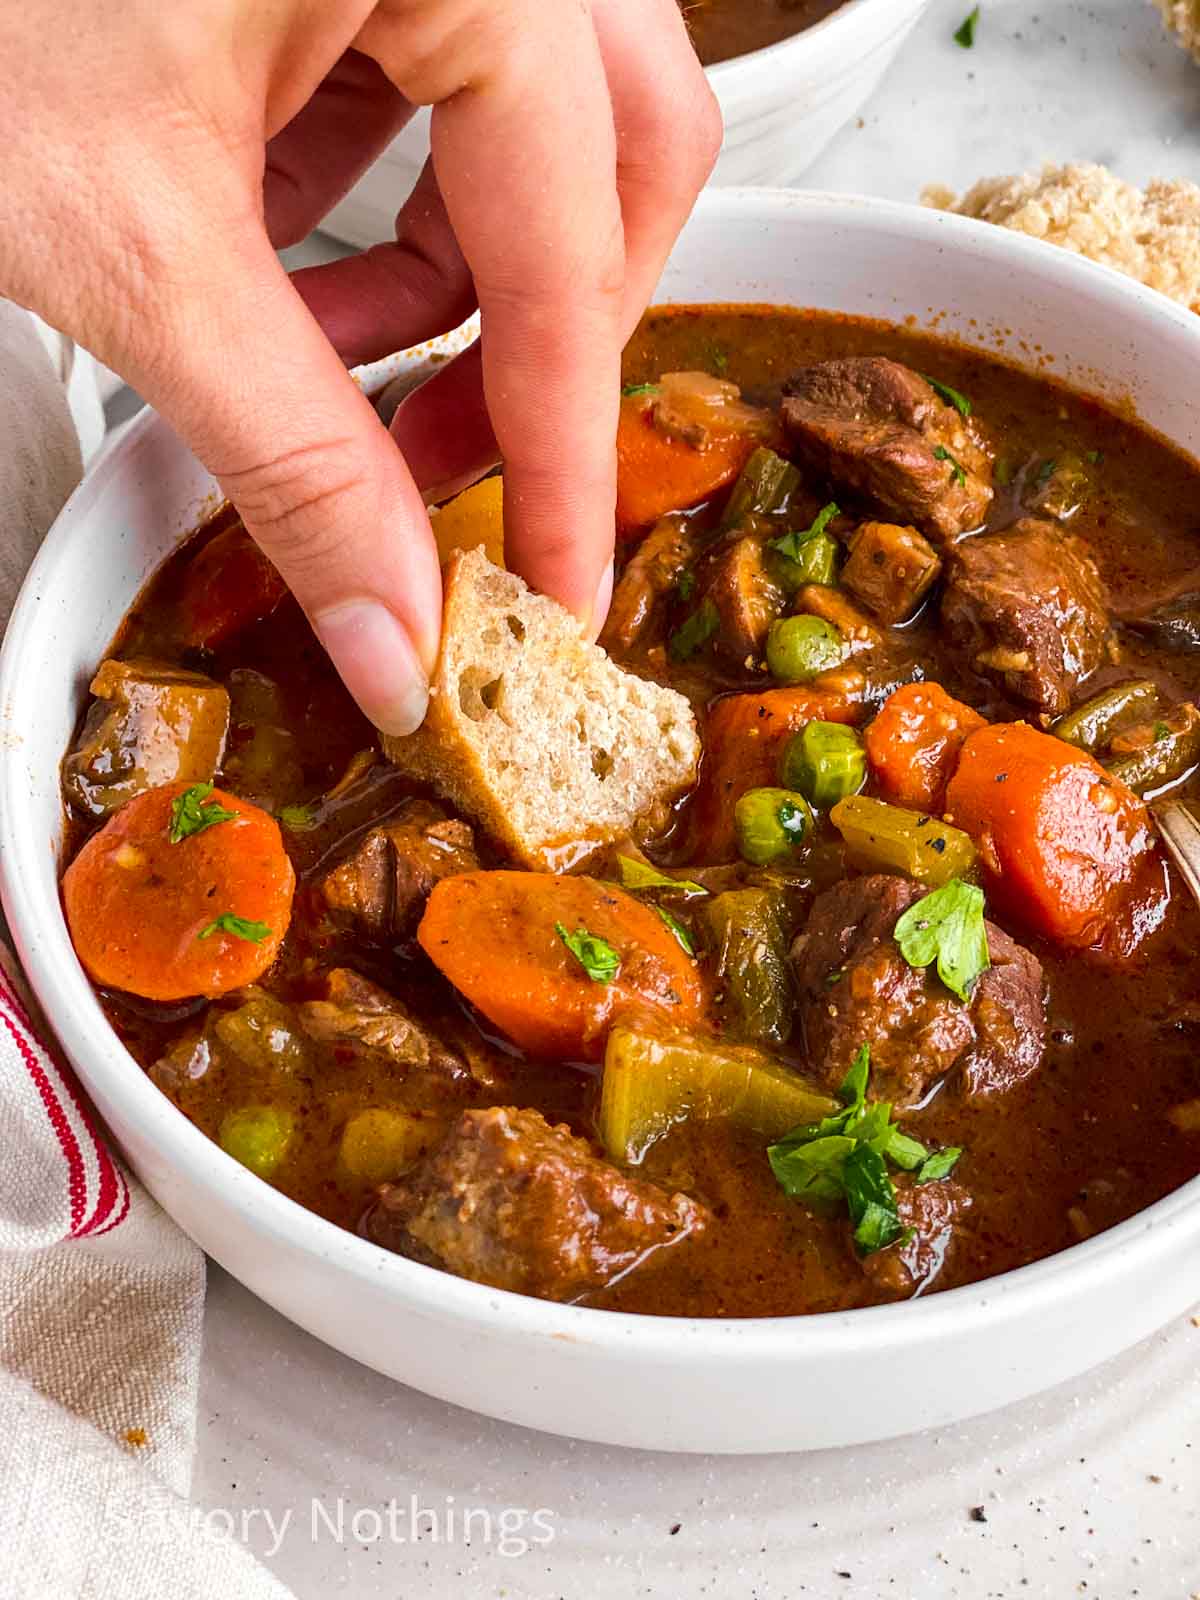 https://www.savorynothings.com/wp-content/uploads/2021/11/instant-pot-beef-stew-image-0-2.jpg